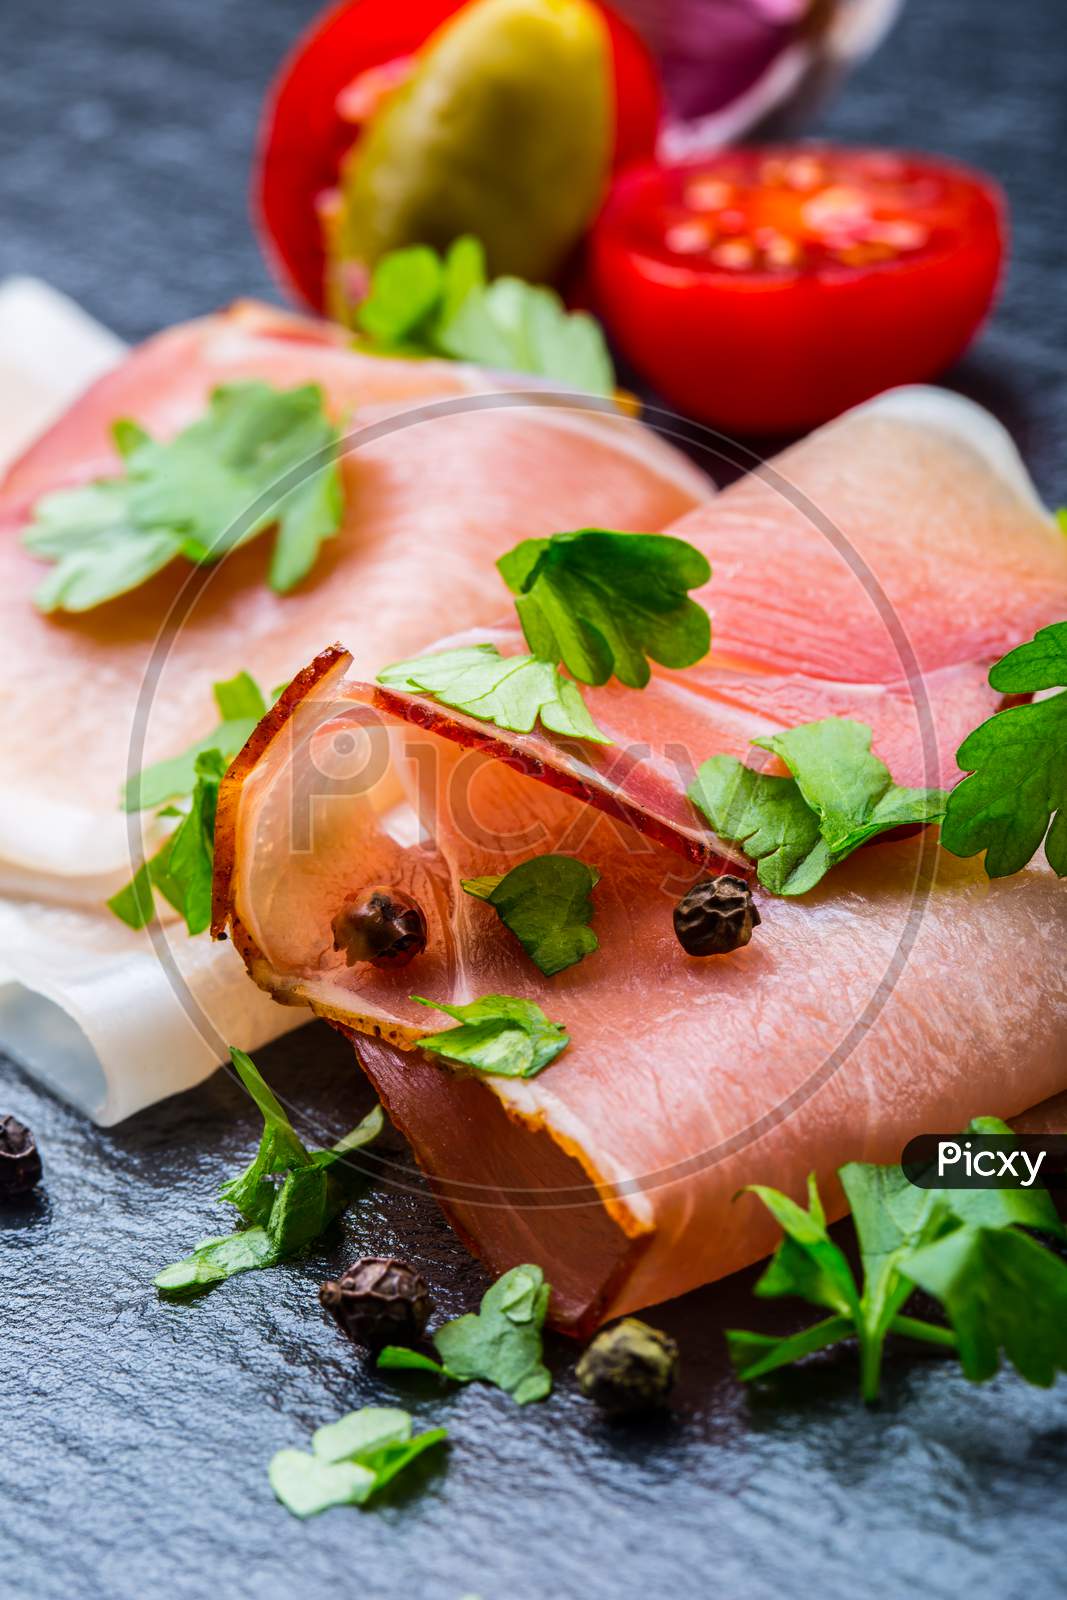 Prosciutto. Curled Slices of Delicious Prosciutto with parsley leaves on granite board. Prosciuto with spice cherry tomatoes garlic and olive. Italian and Mediterranean cuisine